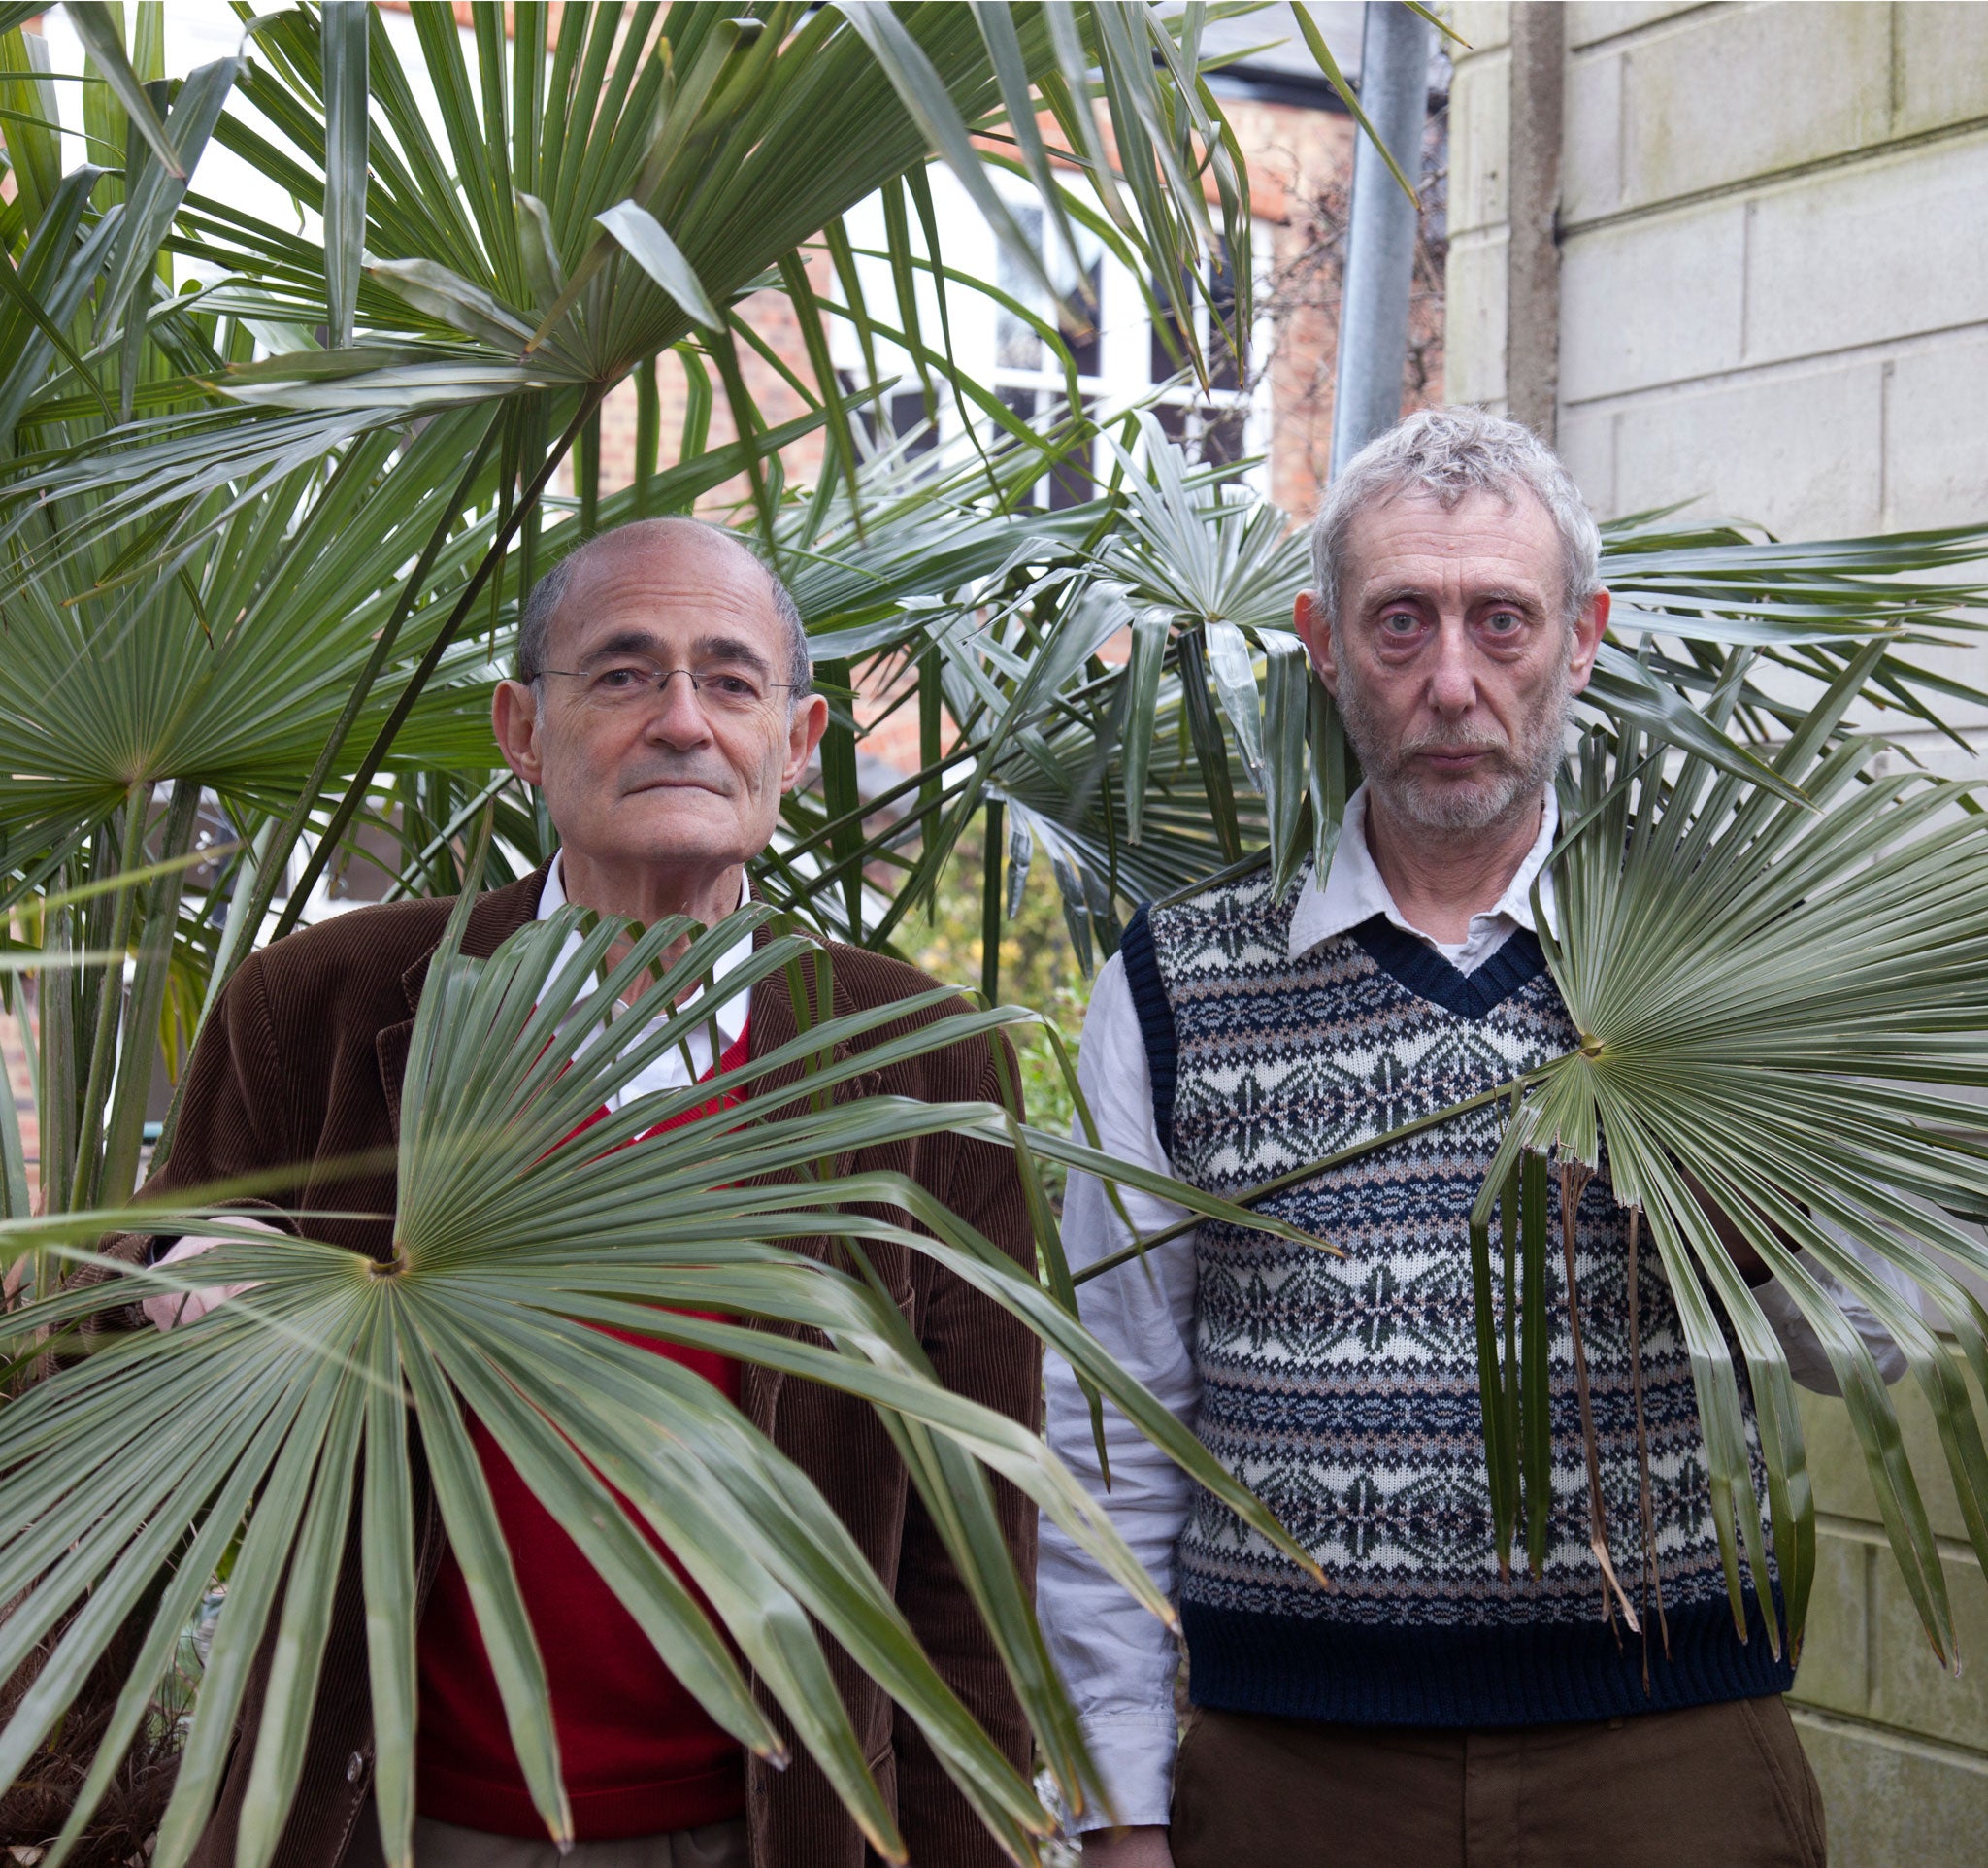 Silma (left) says of Rosen: 'He was the most exhilarating companion, comic and clever'